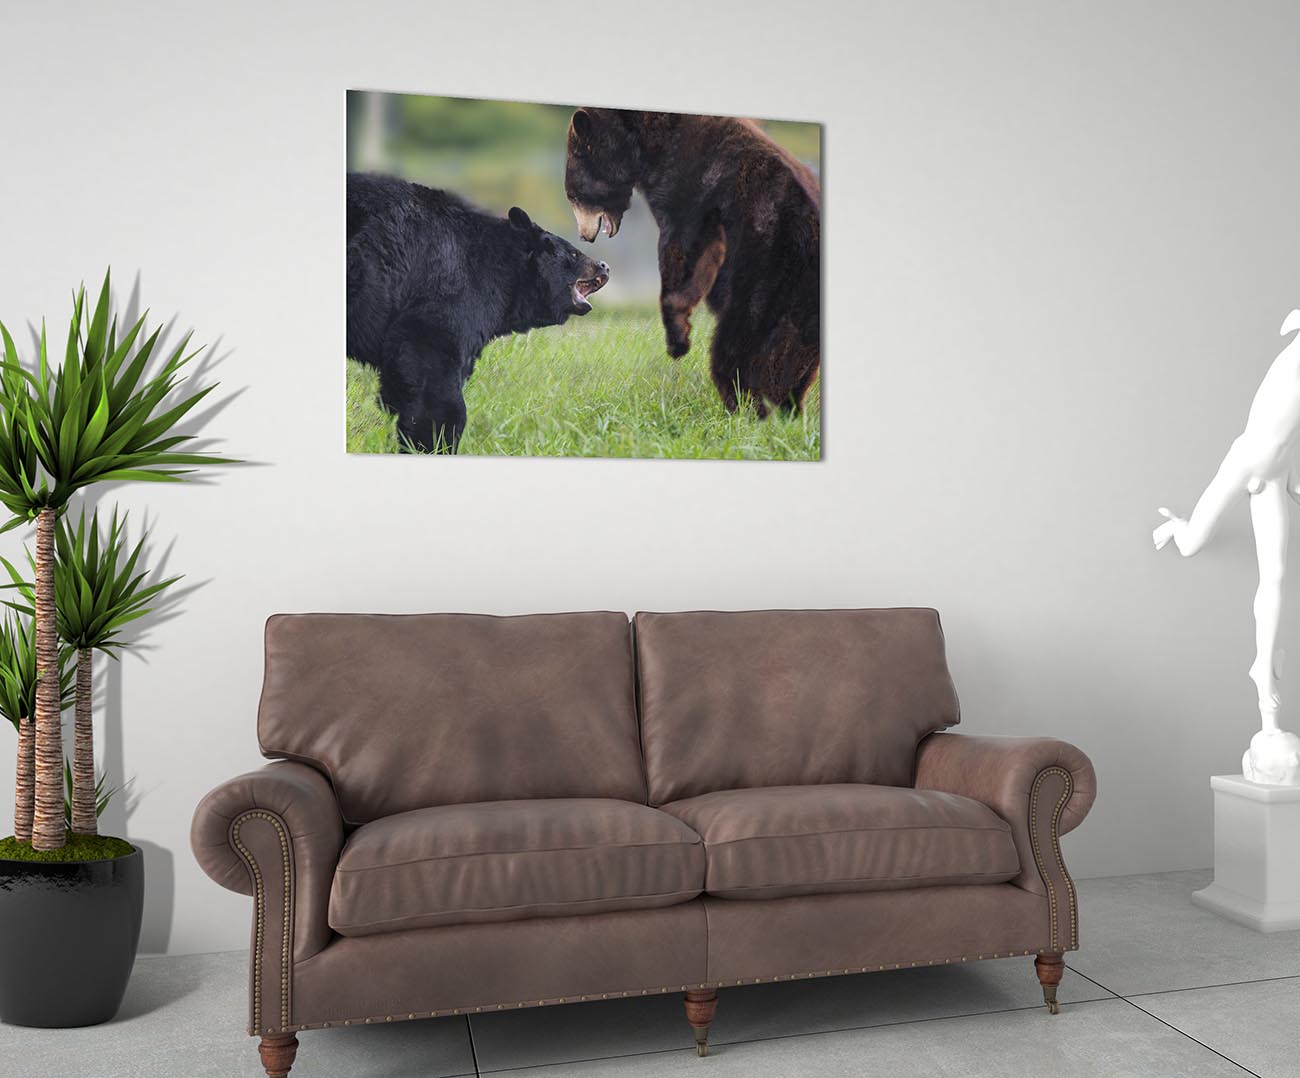 Arkansas Bear Fight by Doug LaRue large print over a couch